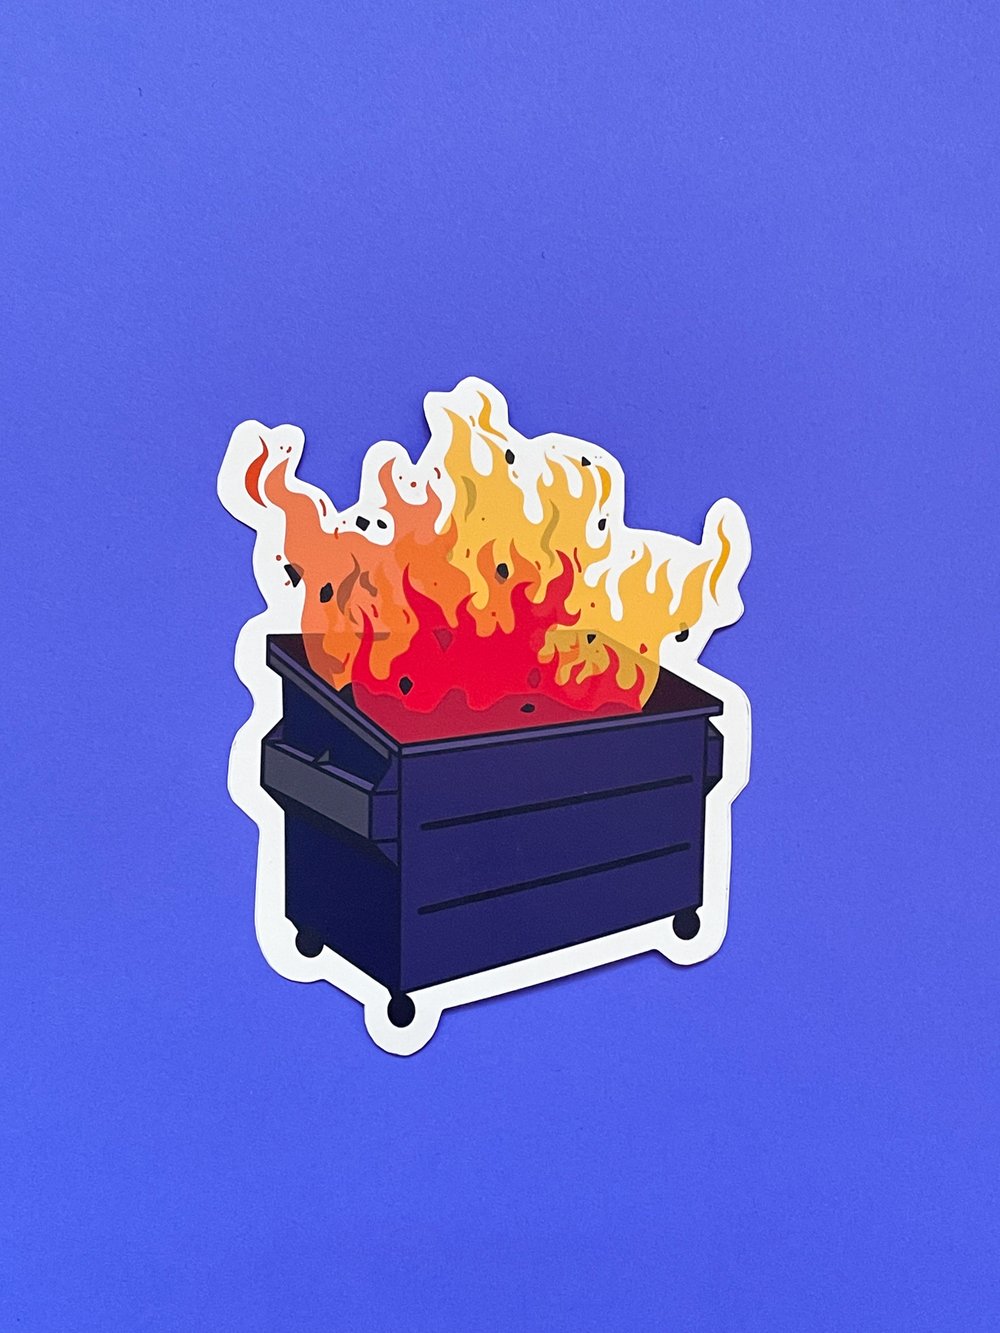 2023 Dumpster Fire Sticker Decal (Select your Size)